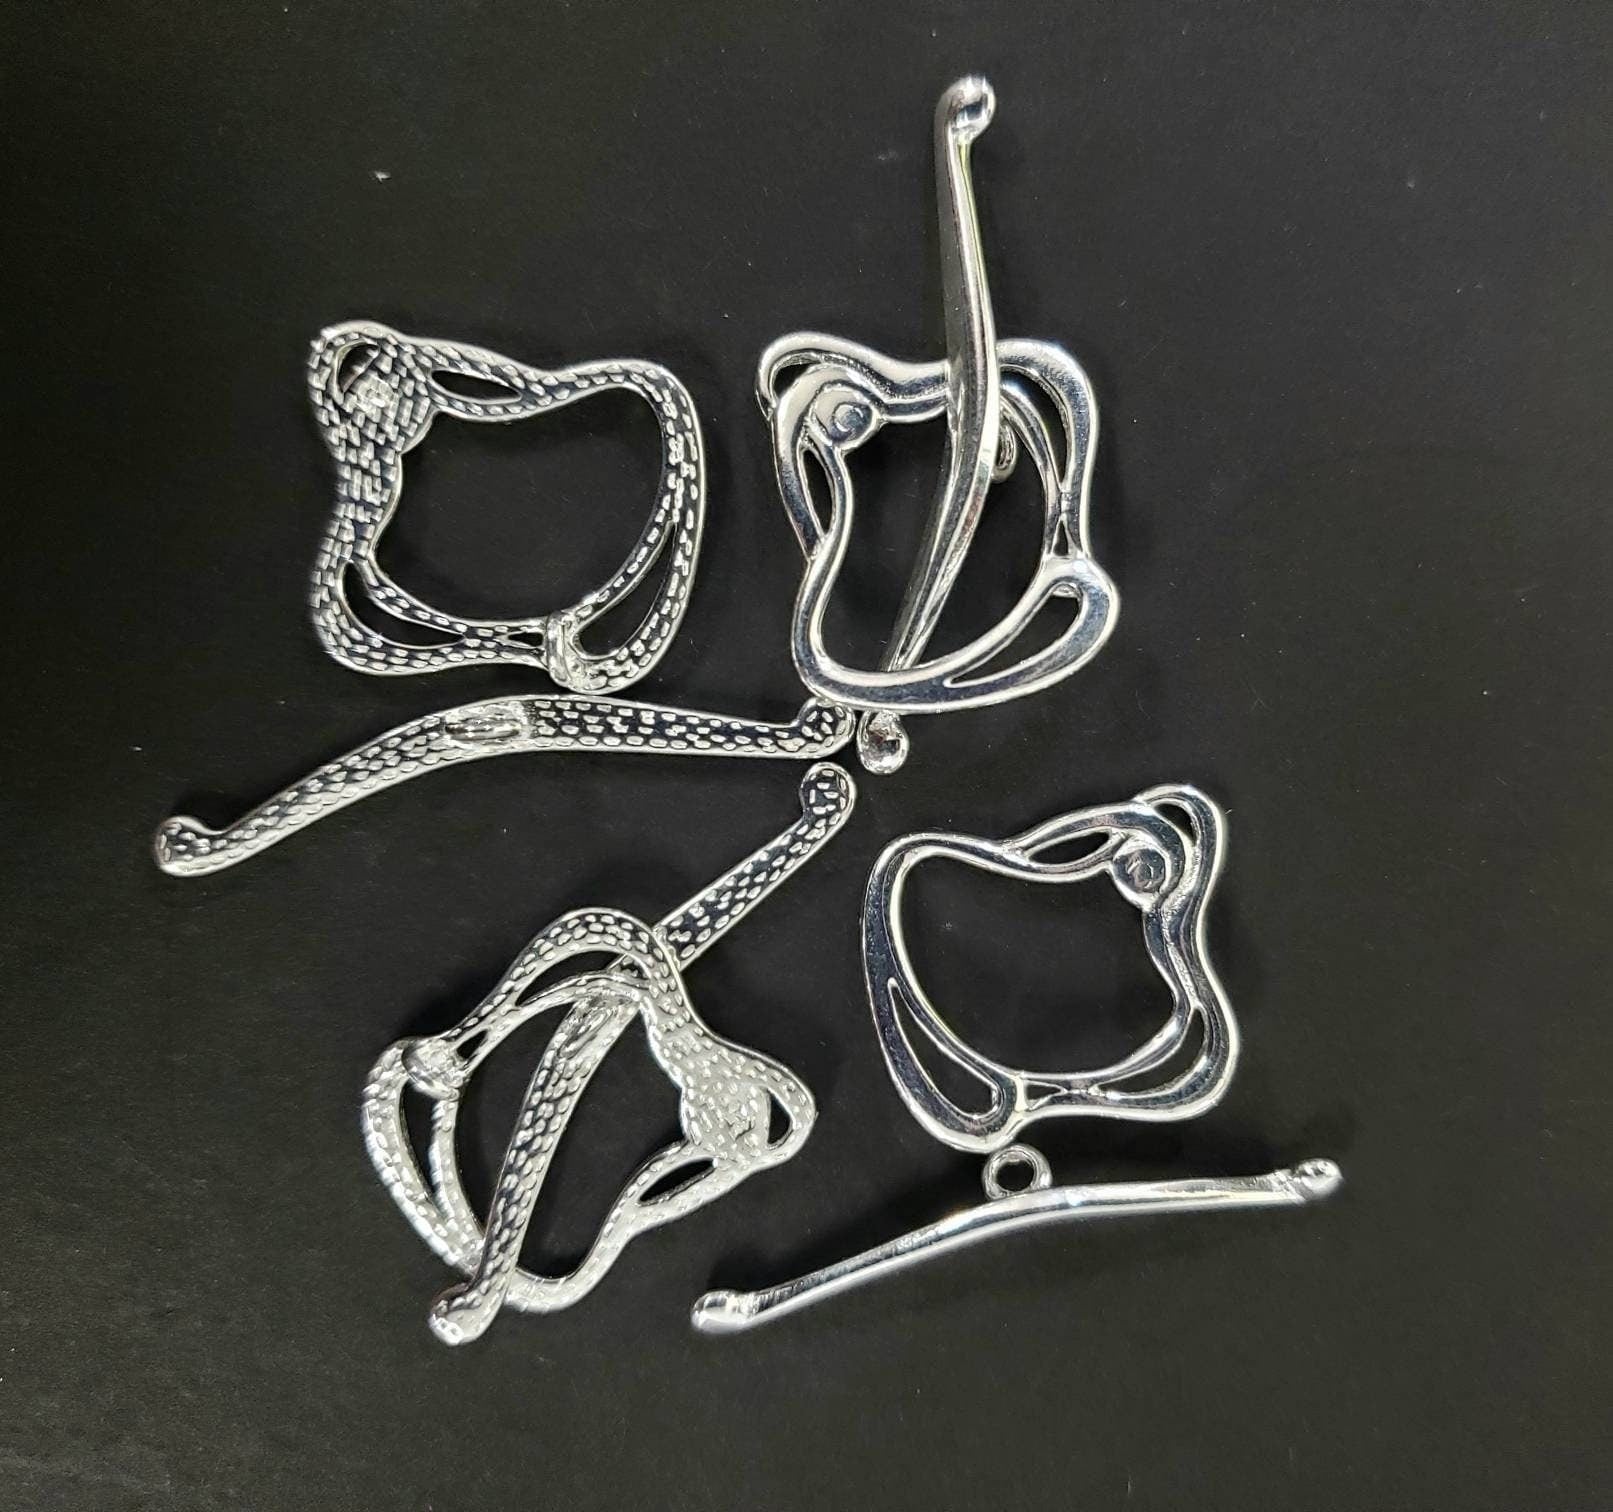 925 Sterling Silver Bali shiny toggle clasp, fancy shape, 13x16mm Square and 30mm long bar. 925 stamped. 1 set or 2 set price .